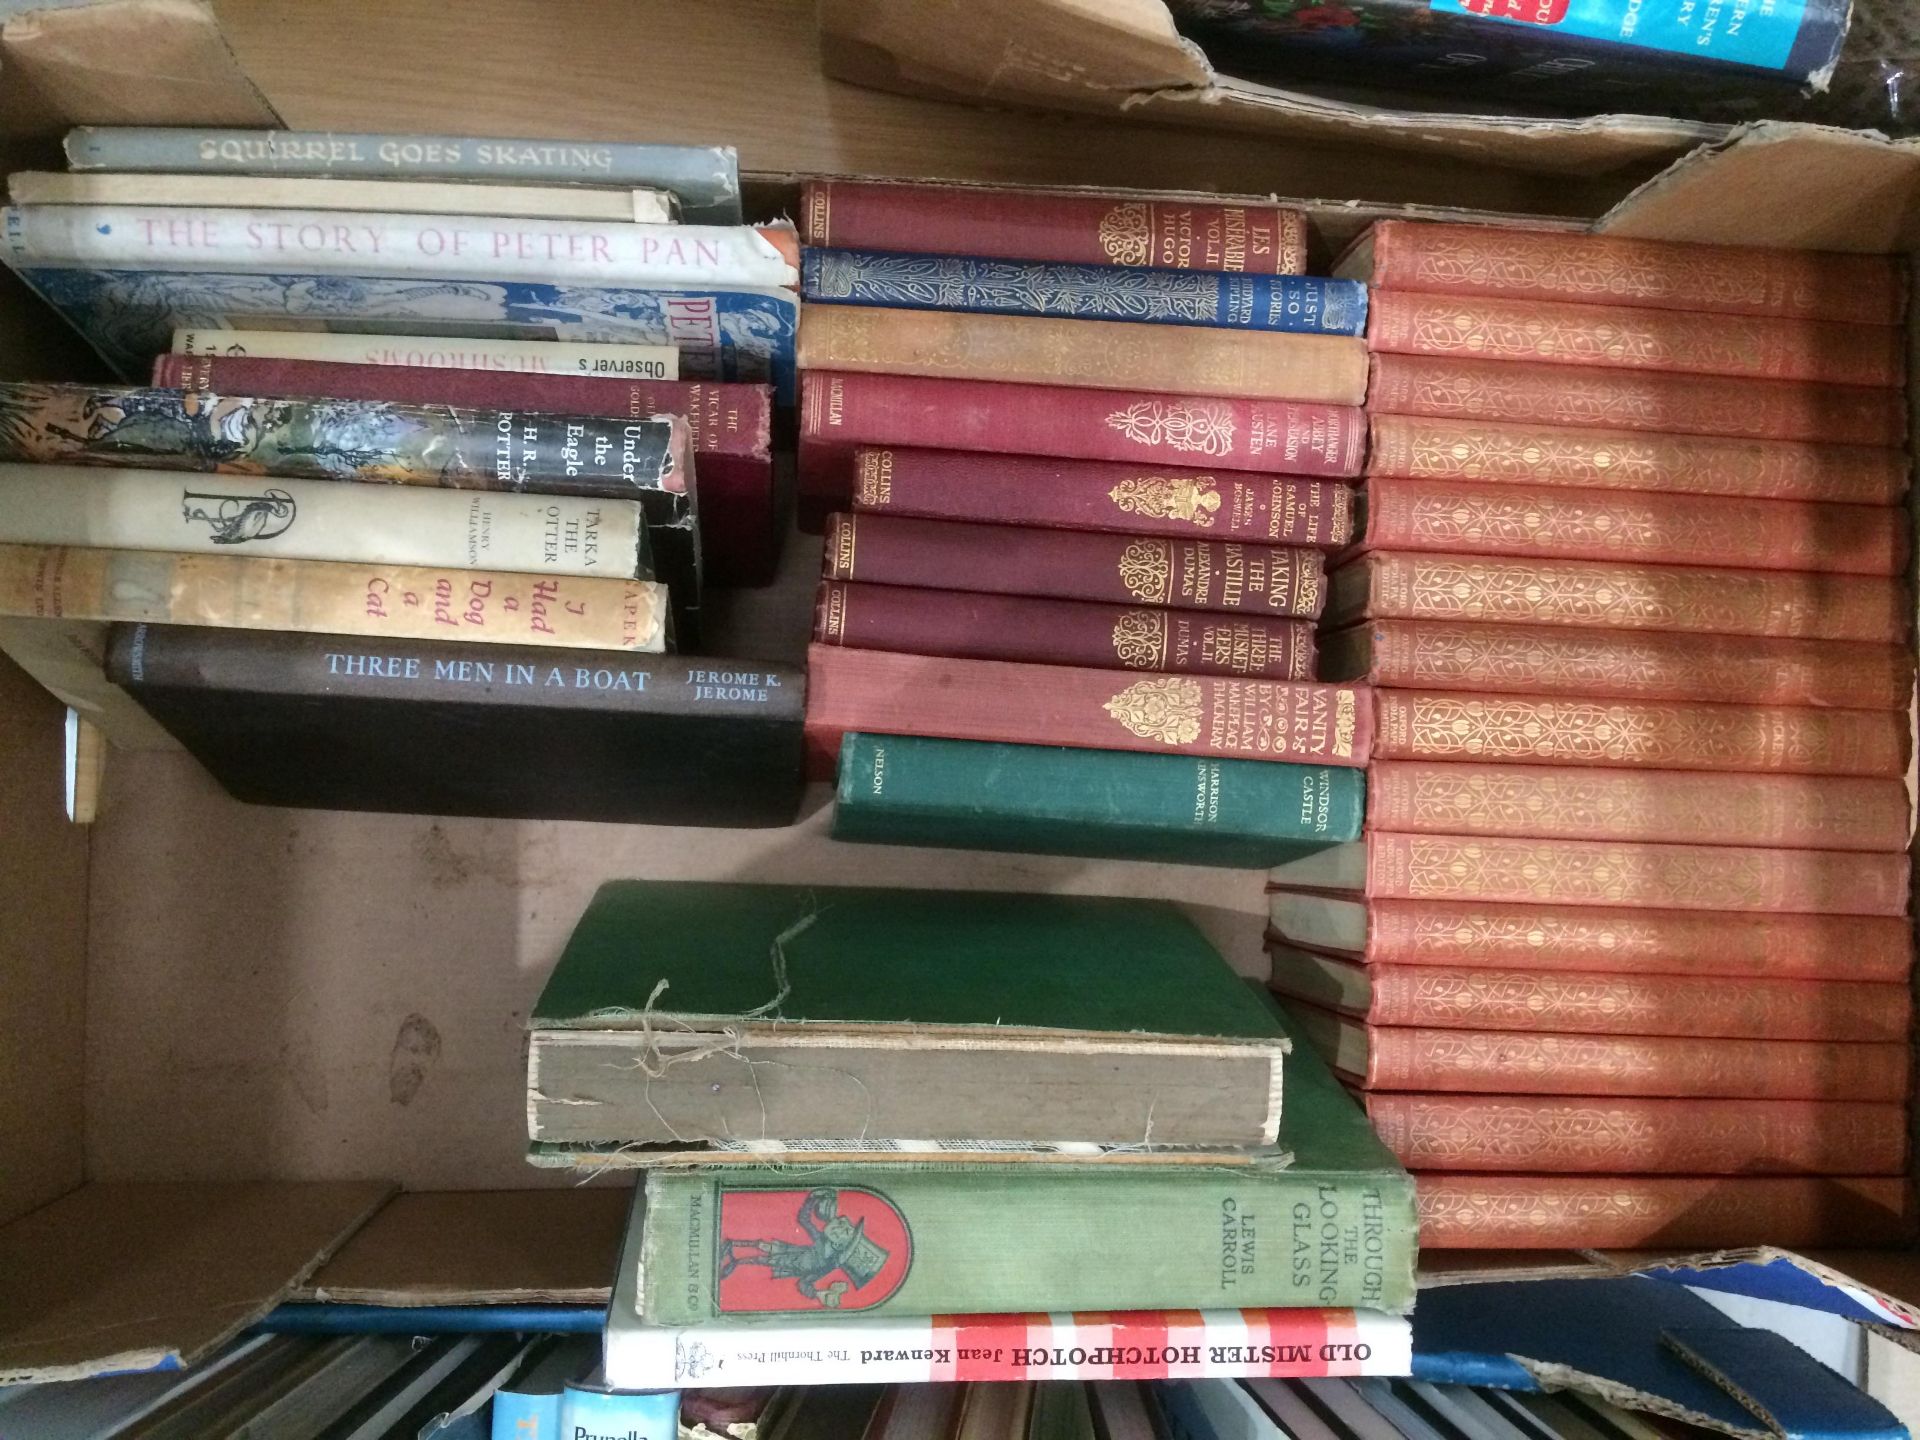 Contents to box - a selection of English literature books including fifteen volumes of Dickens with